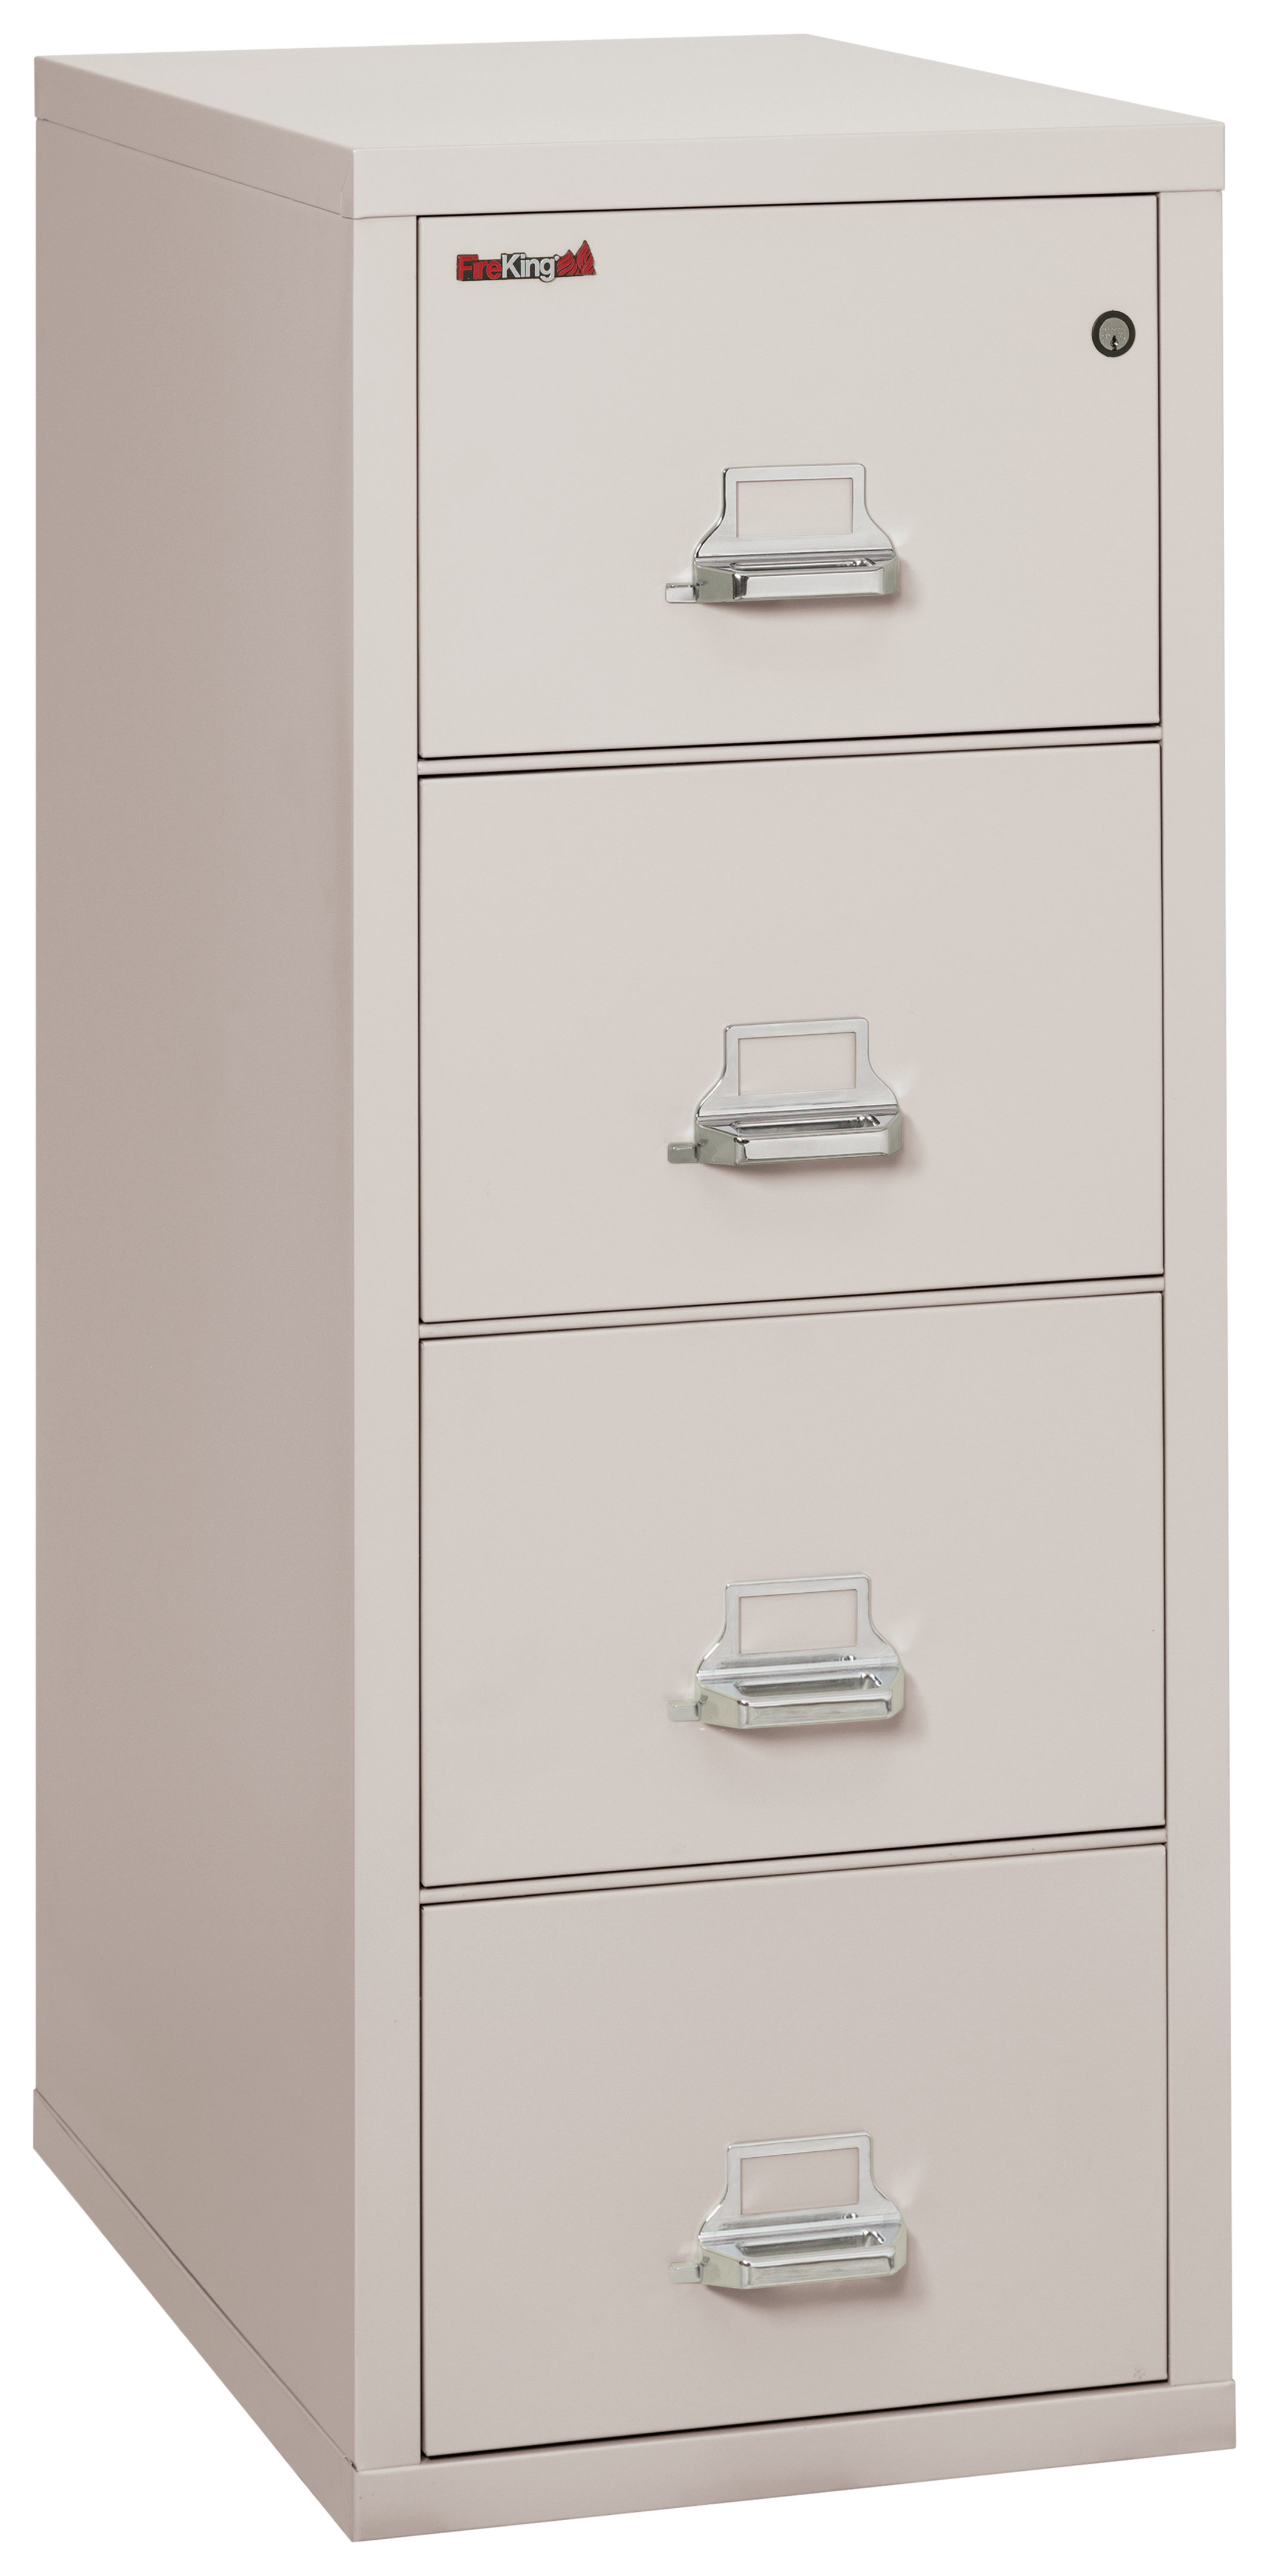 Fireproof 4 Drawer Vertical File Cabinet with regard to size 2123 X 4336